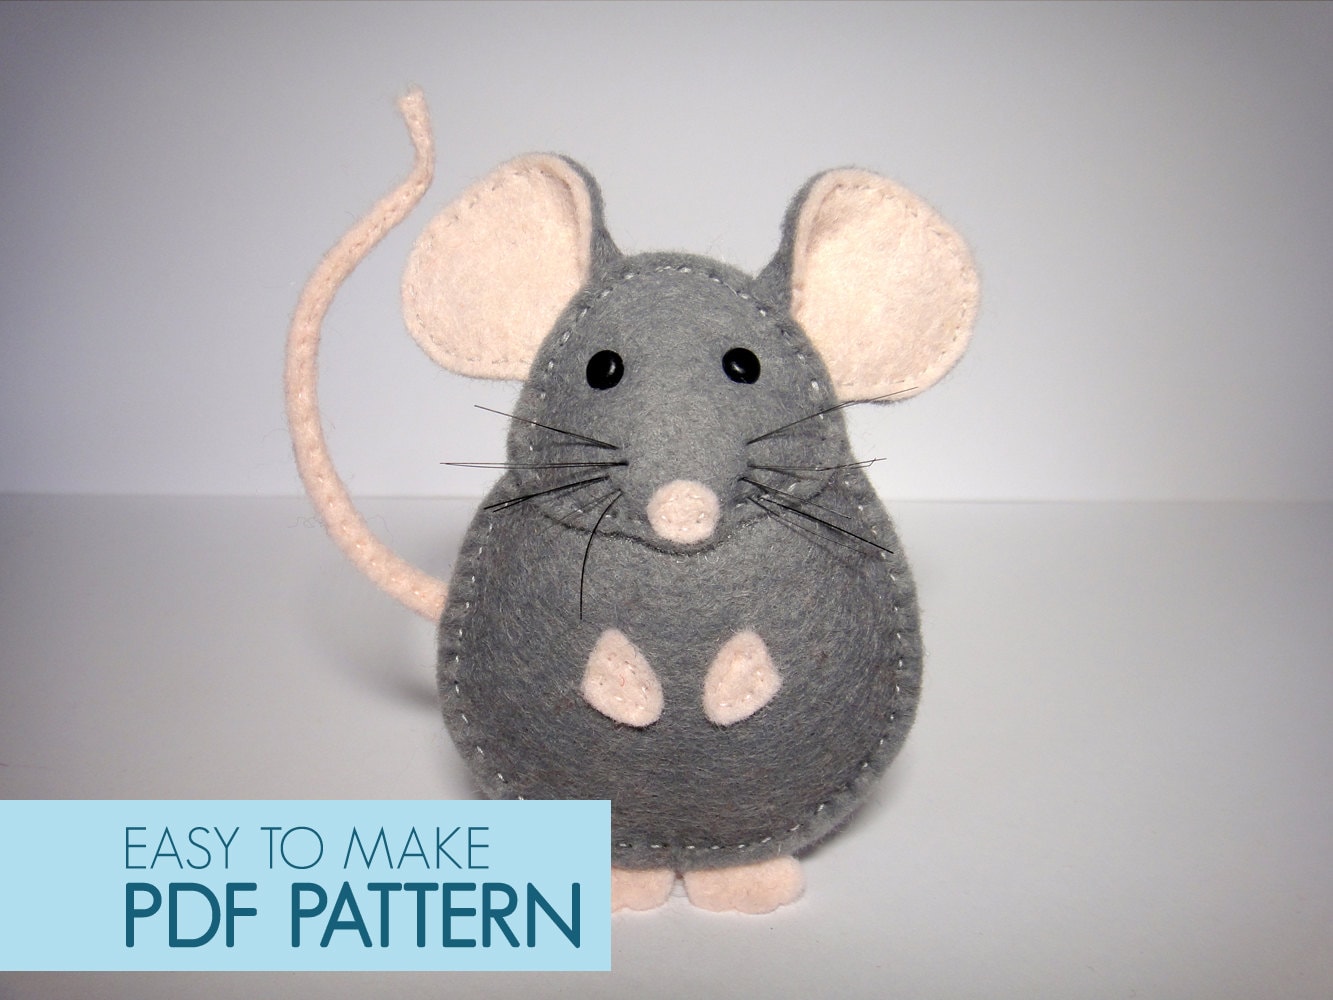 Easy to sew felt PDF pattern. DIY Pablo the Mouse finger